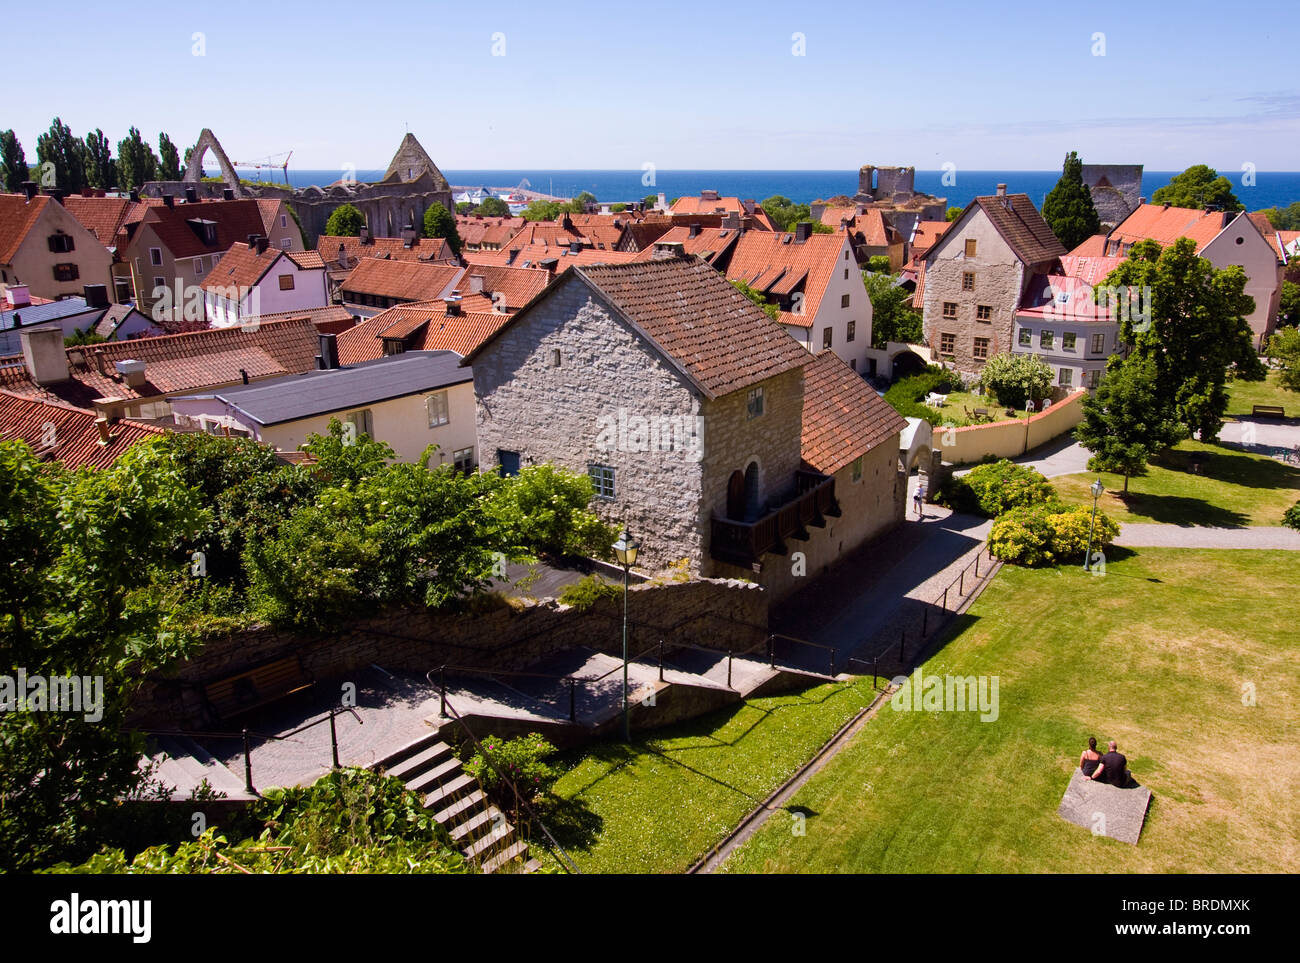 The Hanseatic town of Visby, Gotland, Sweden is on the UNESCO world heritage list. Stock Photo